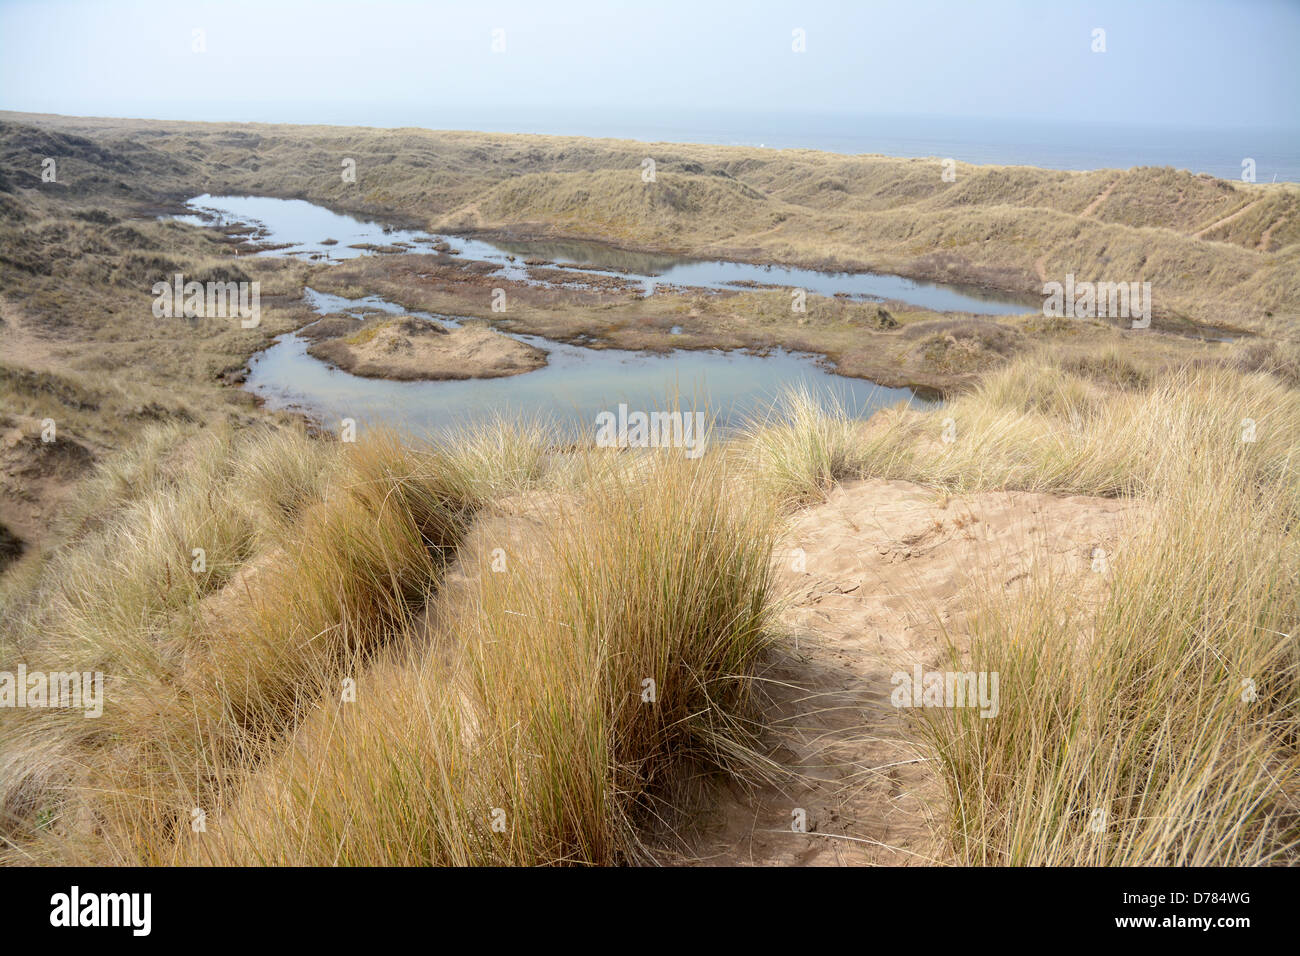 The Sefton Coast Special Area of Conservation covers 4,500 hectares of beach and dune habitats where seasonal ponds form Stock Photo